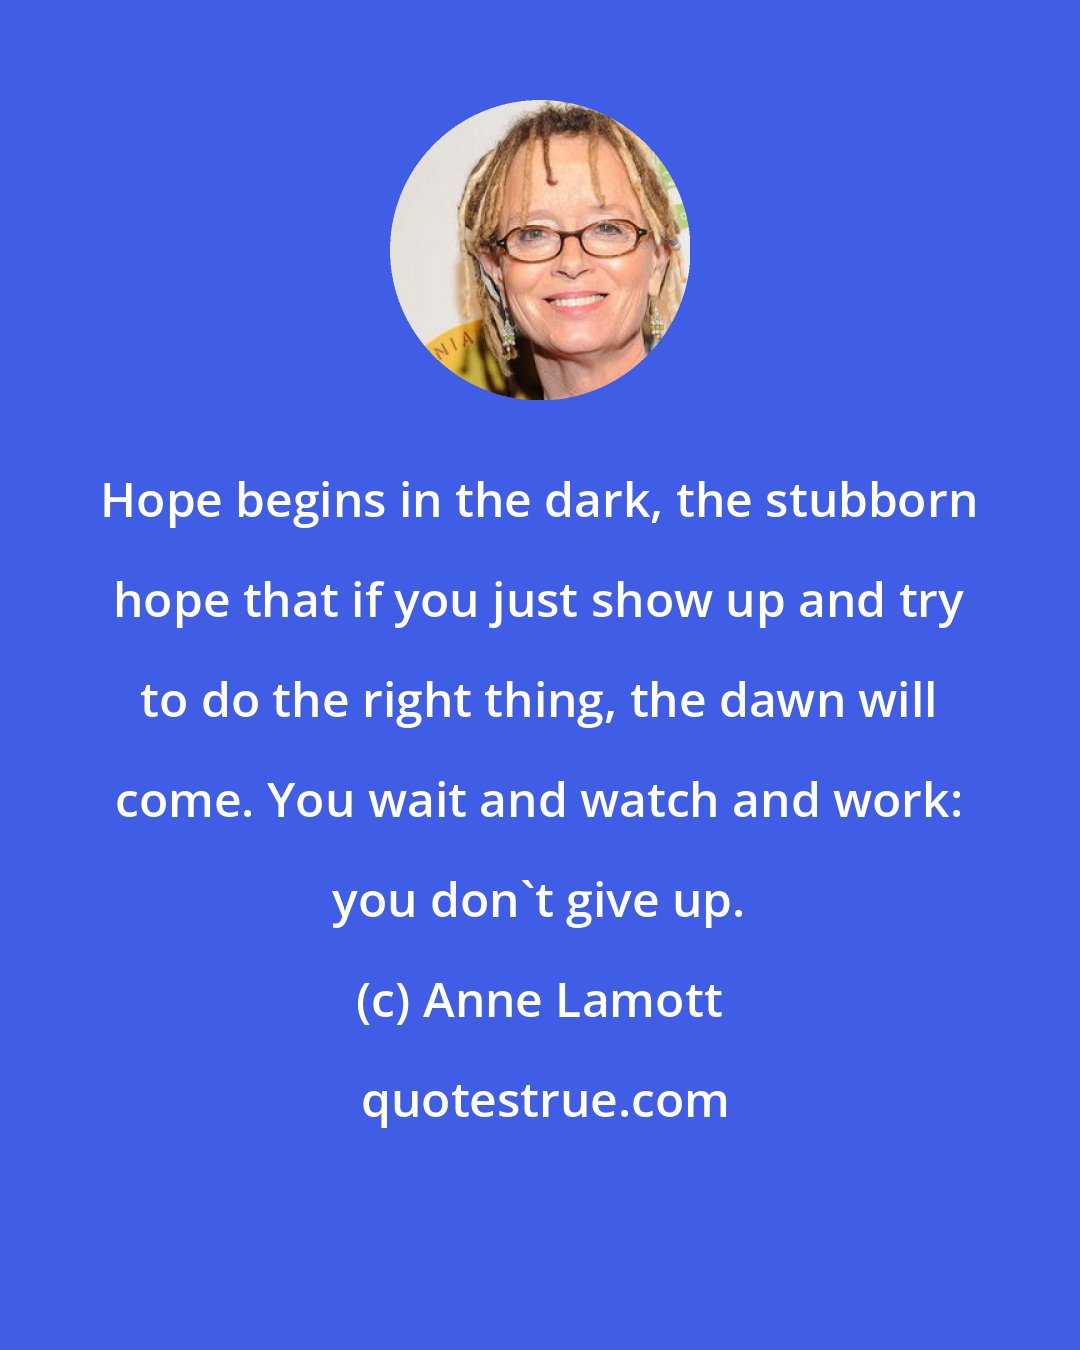 Anne Lamott: Hope begins in the dark, the stubborn hope that if you just show up and try to do the right thing, the dawn will come. You wait and watch and work: you don't give up.